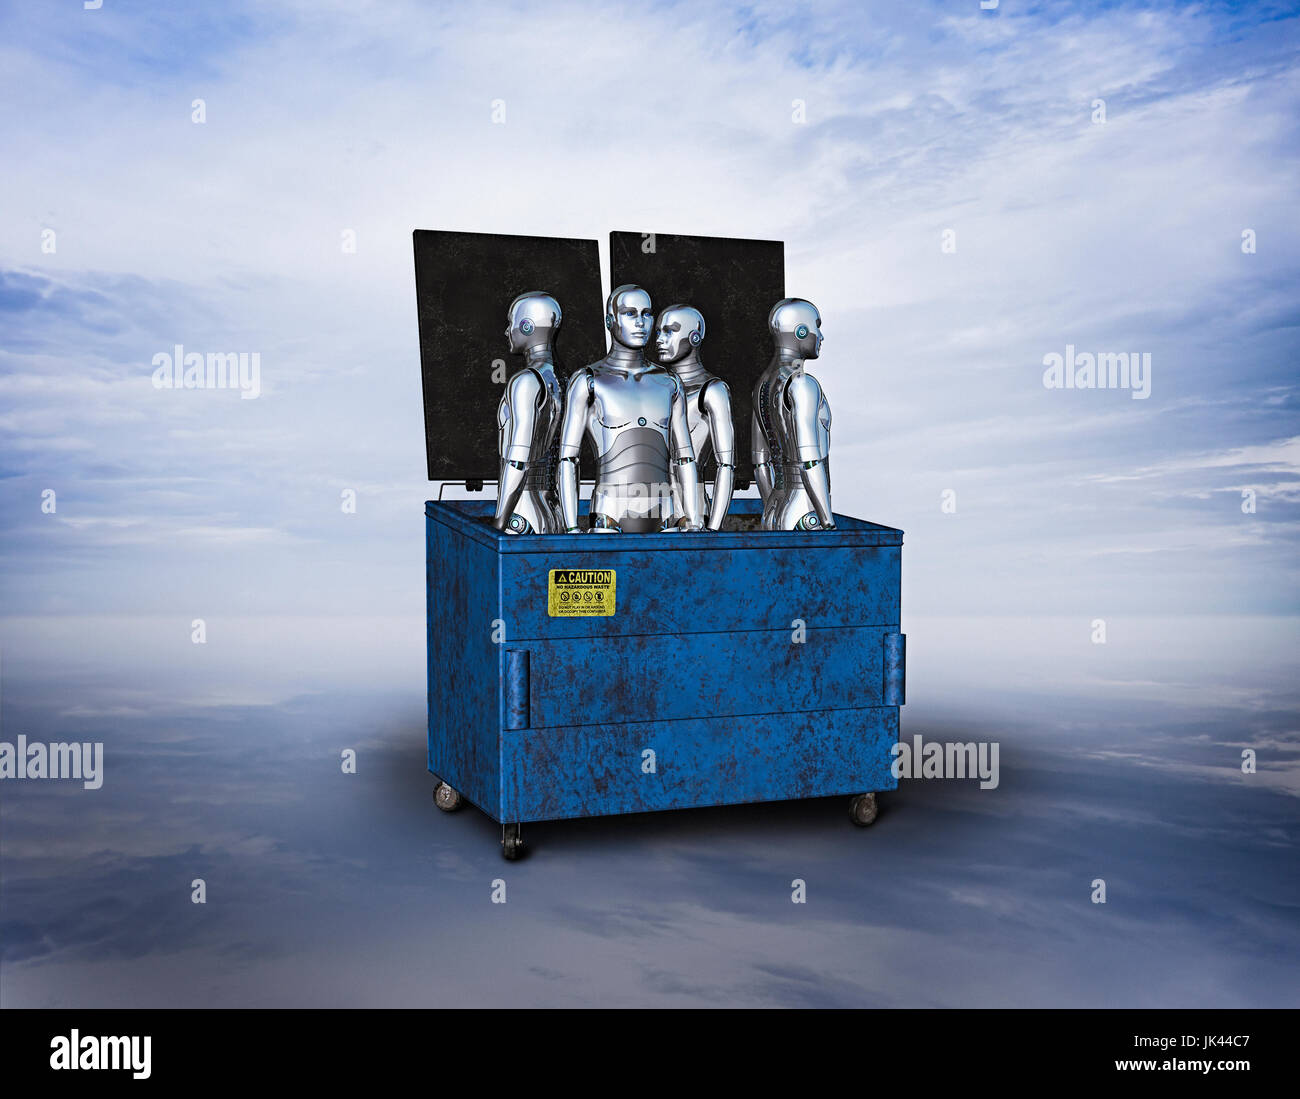 Obsolete robots in garbage dumpster Stock Photo